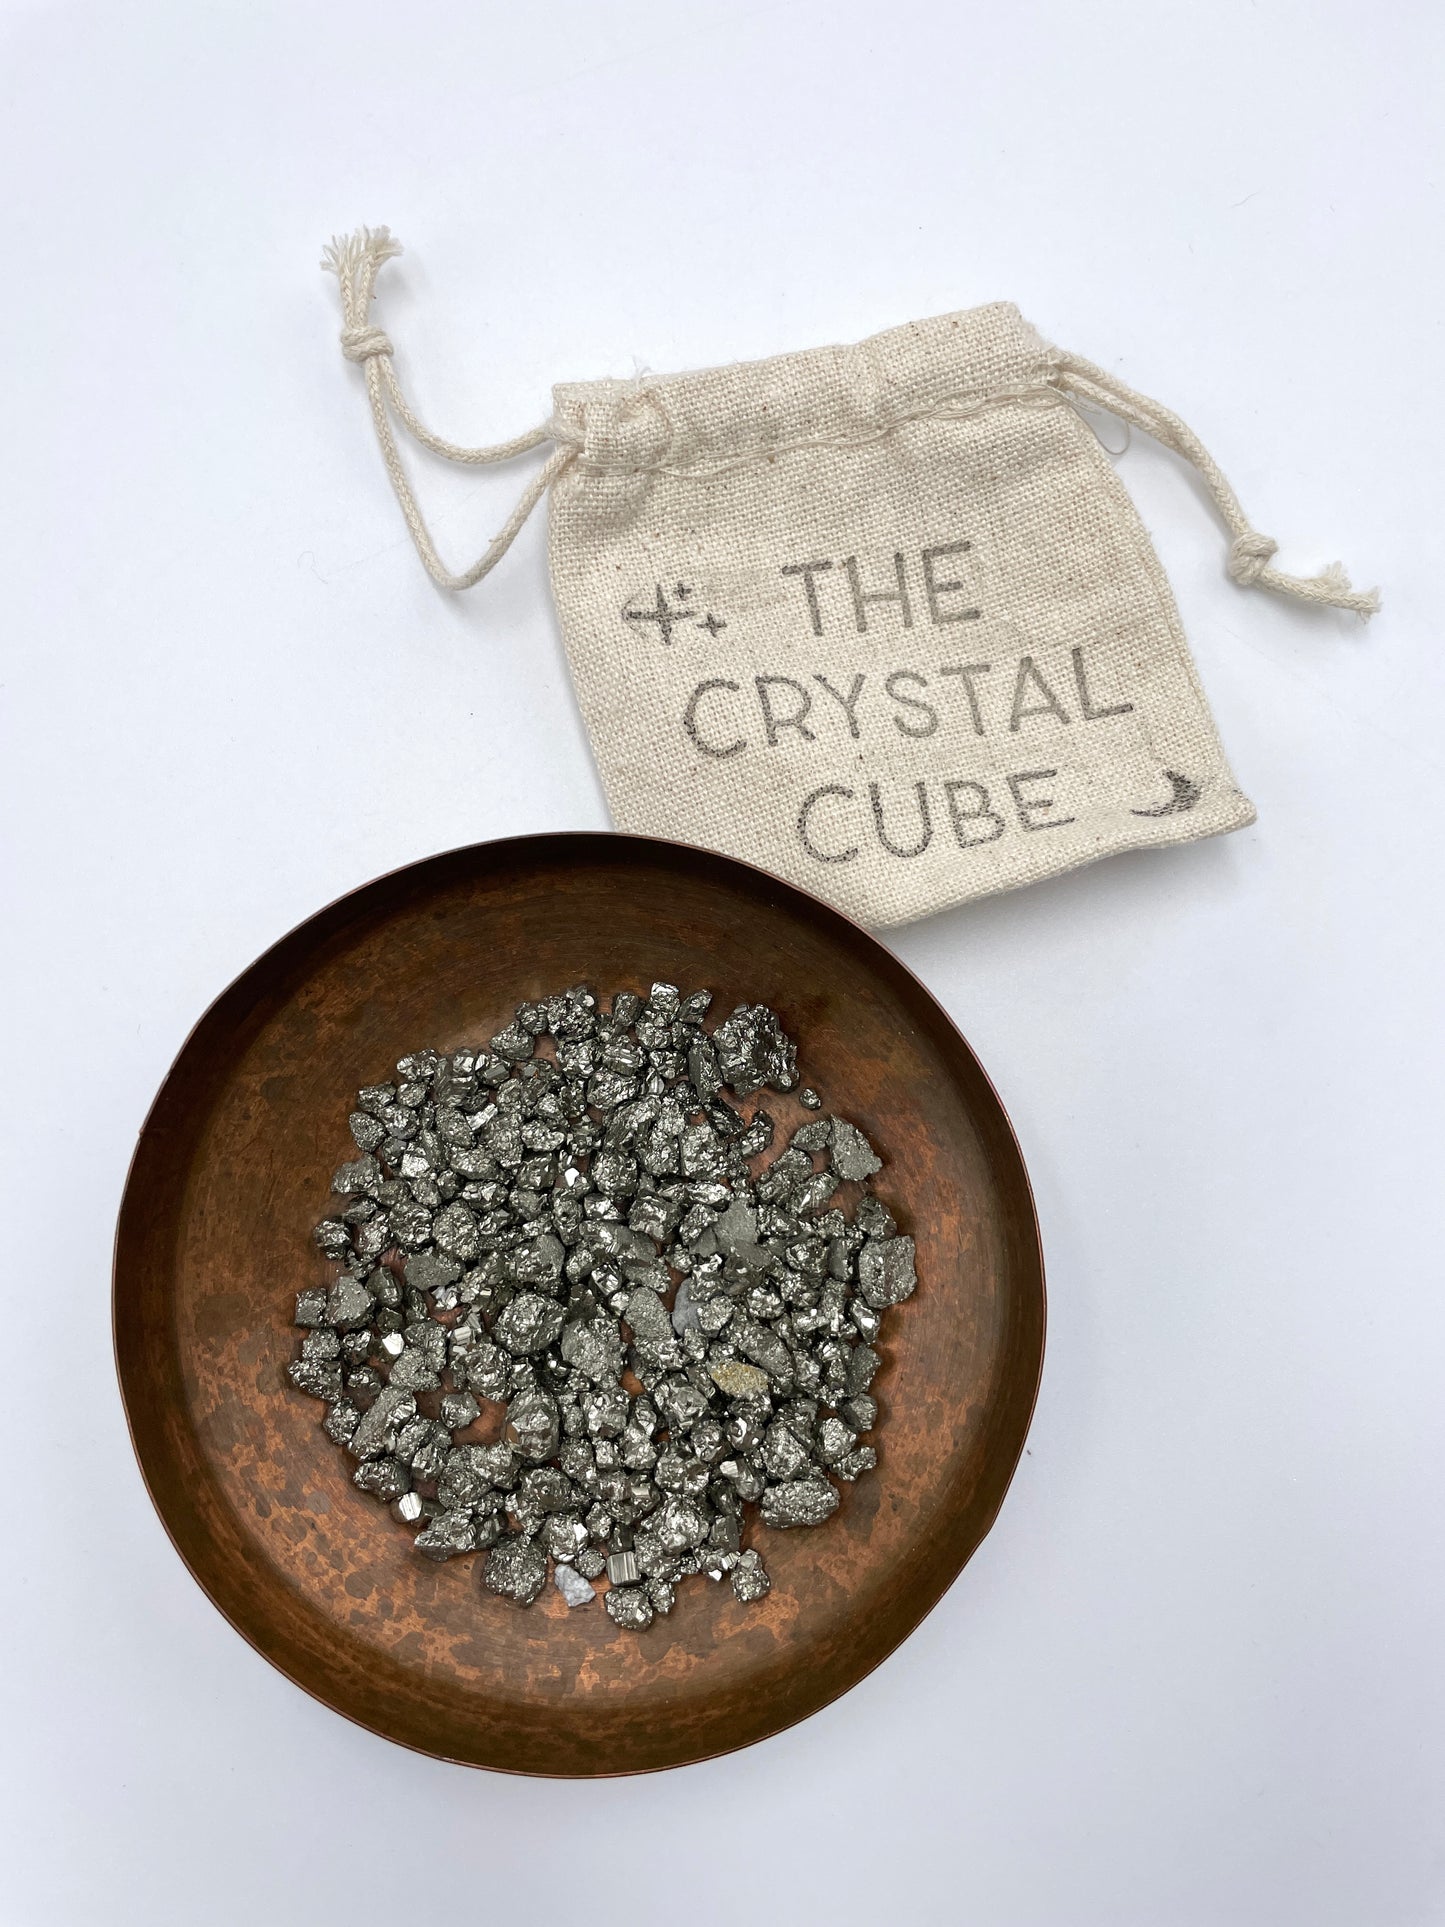 Pyrite Chips